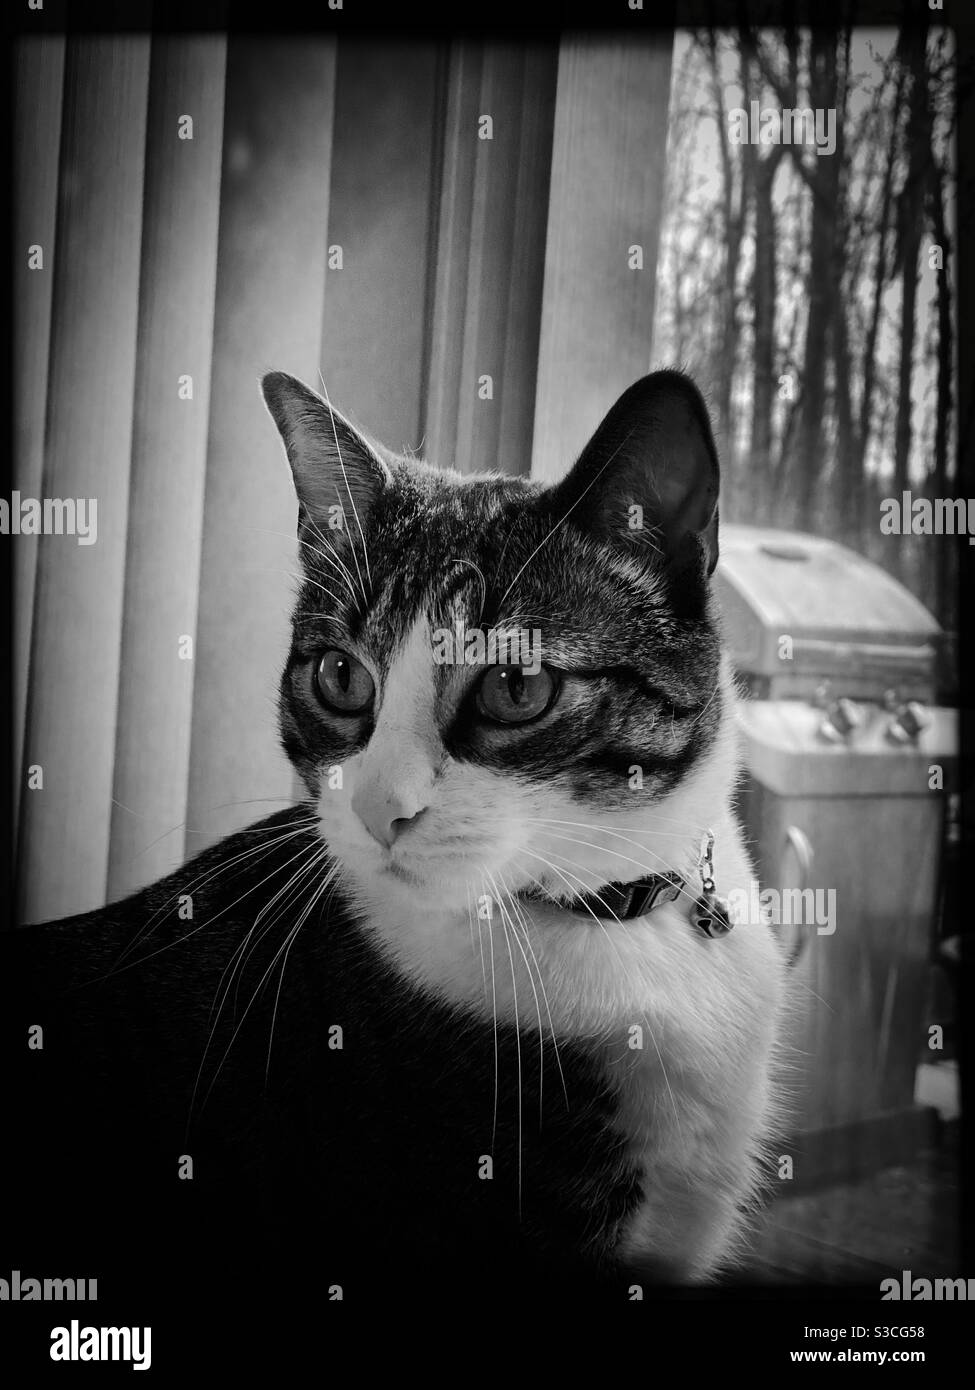 Tabby and white cat portrait in black and white Stock Photo